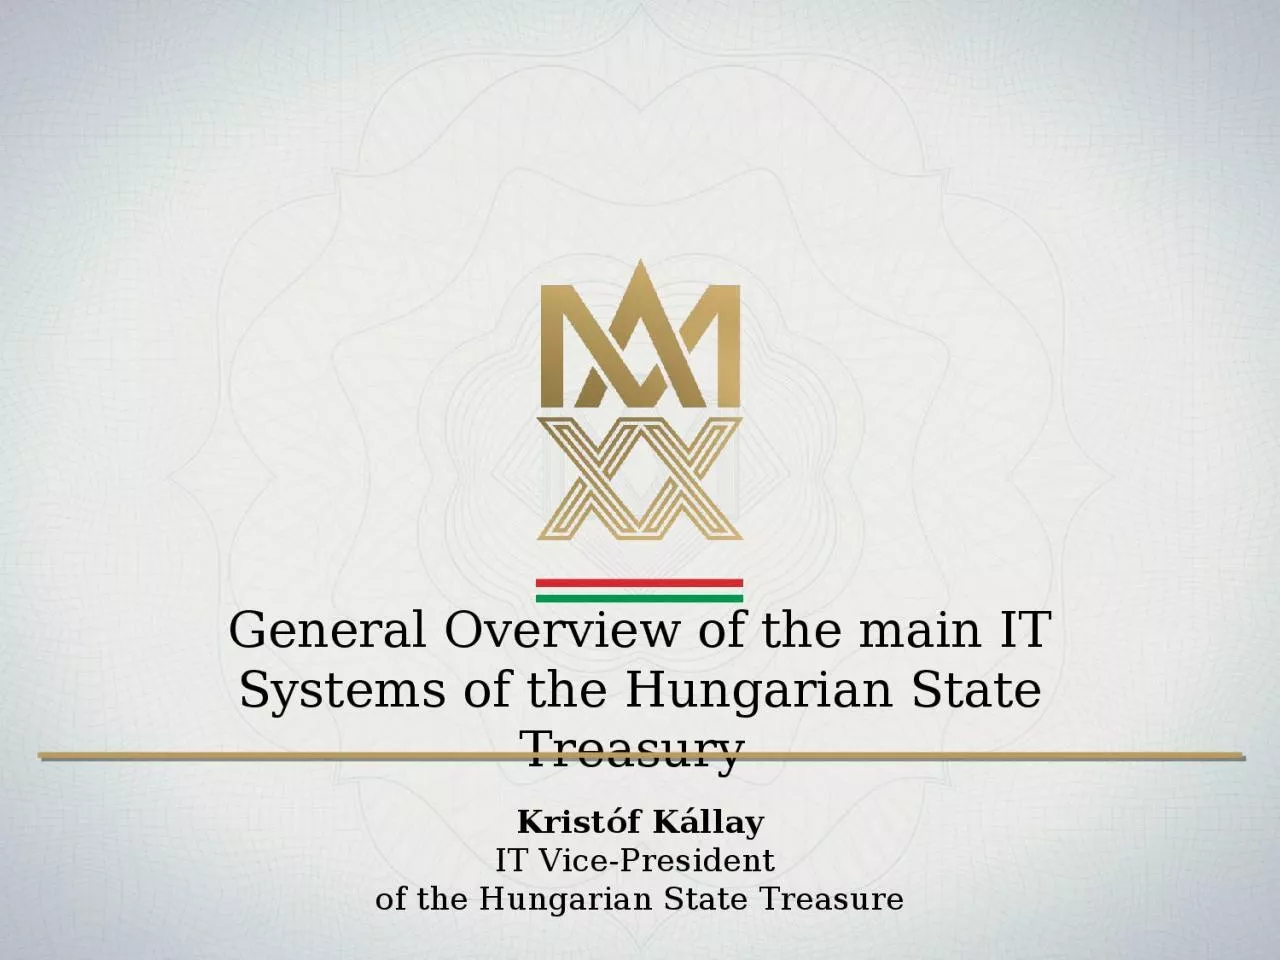 General Overview of the main IT Systems of the Hungarian State Treasury